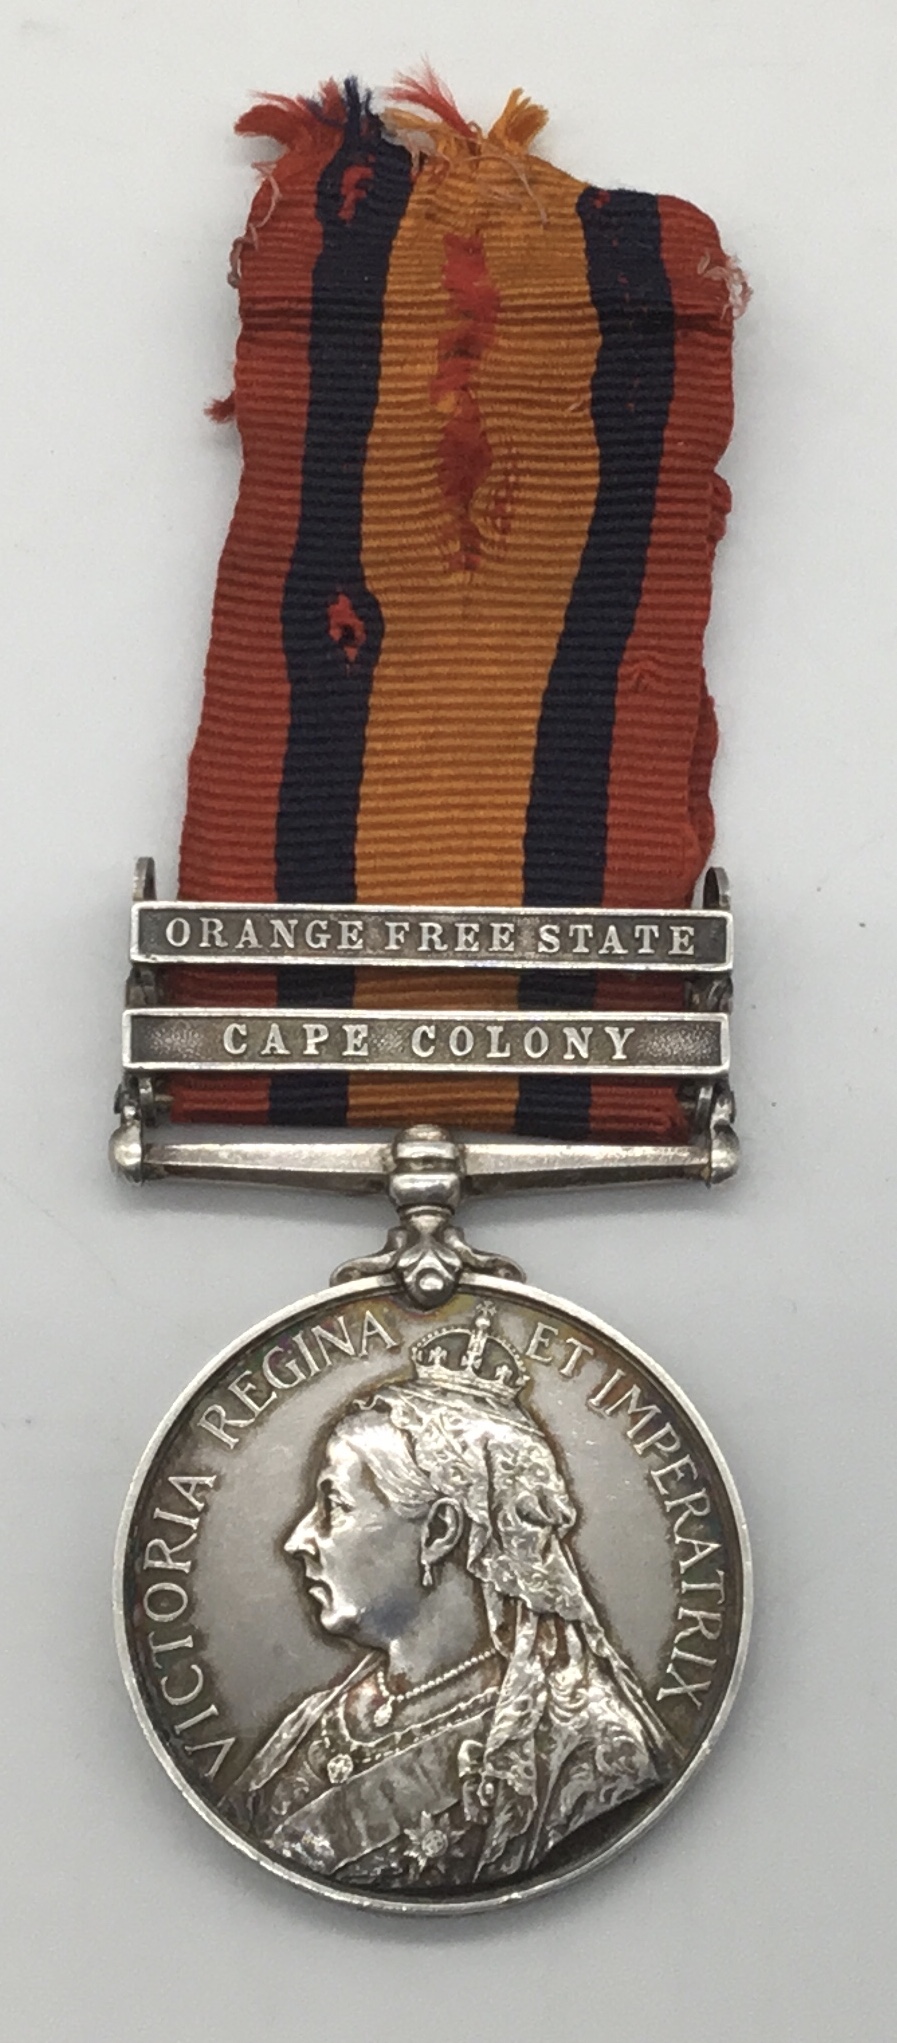 Queen’s South Africa Medal, with clasps for Orange Free State and Cape Colony. Awarded to 6063 Pte